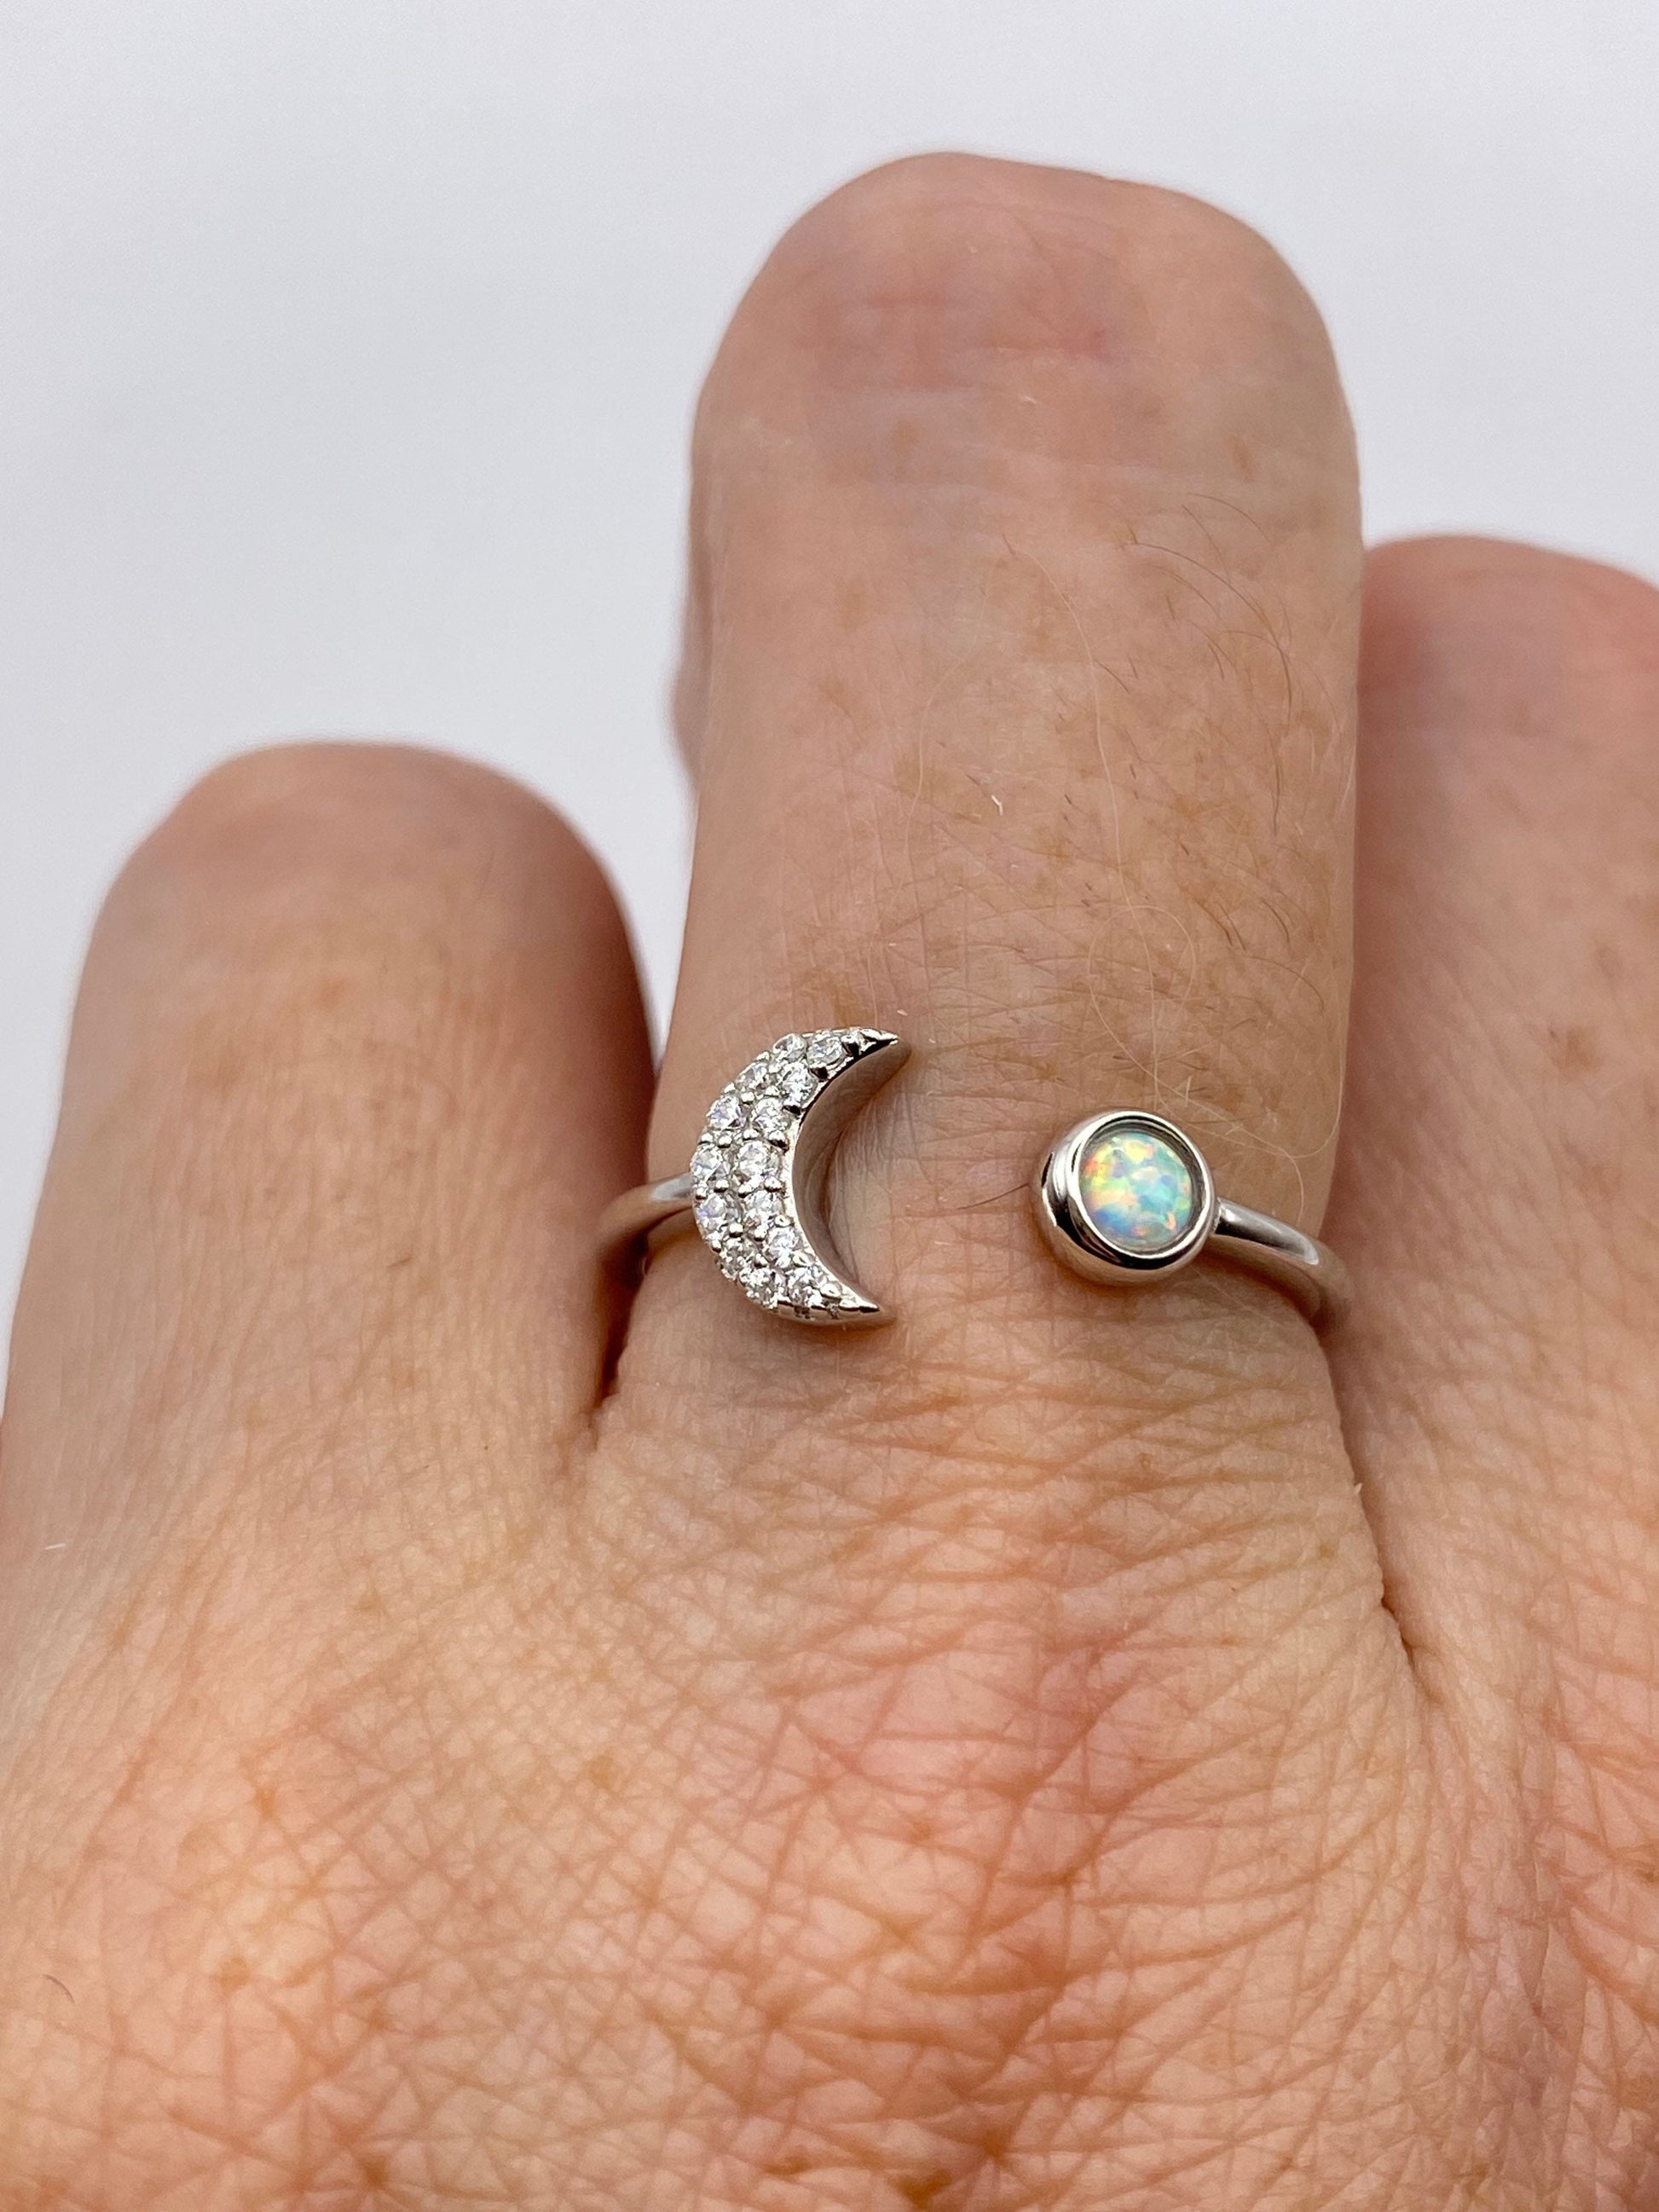 Vintage Ethiopian Fire Opal Moon and Star Adjustable Band 925 Sterling Silver Ring